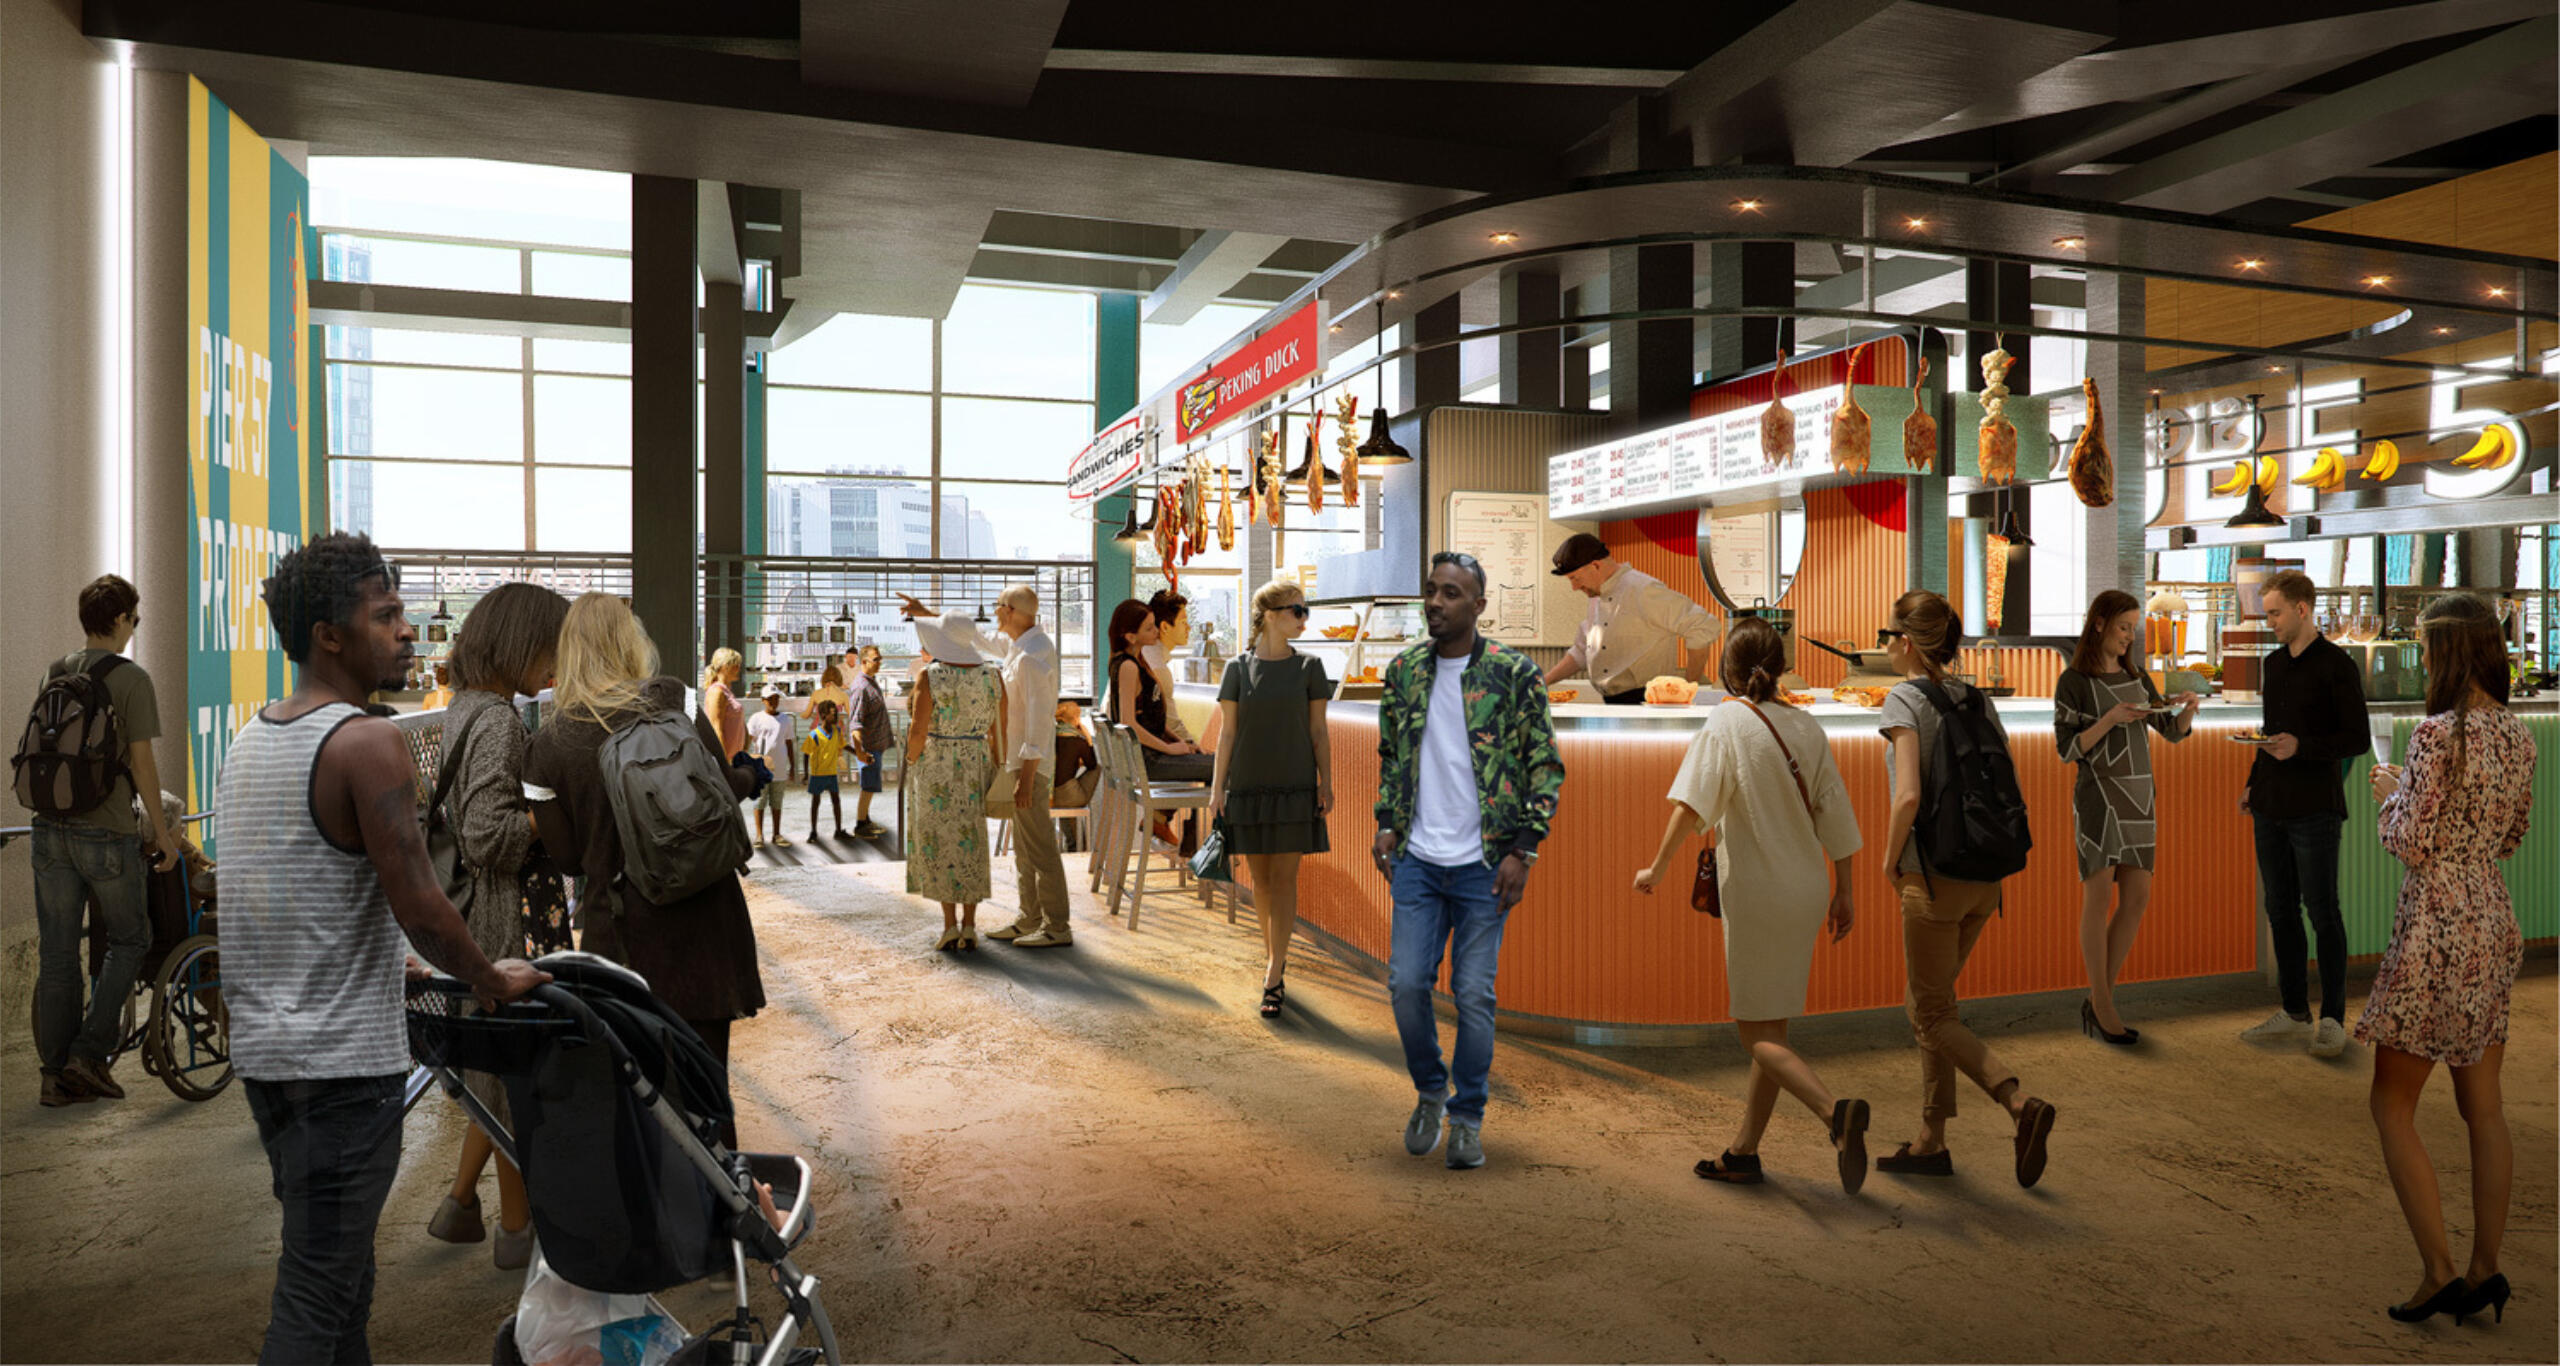 Pier 57 interior rendering with food stalls and visitors